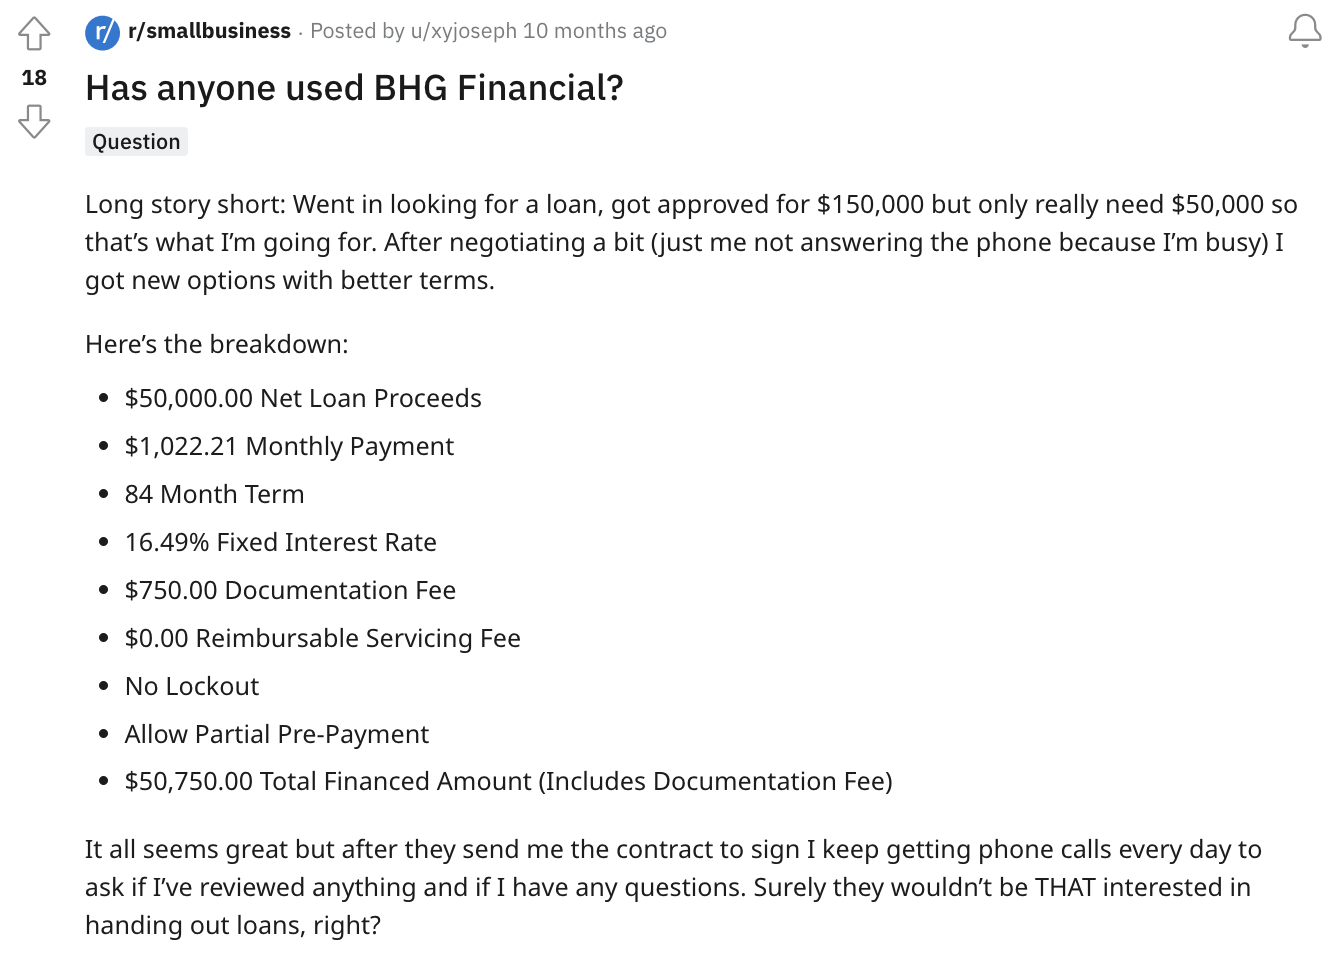 BHG Money Business Loan Requirements